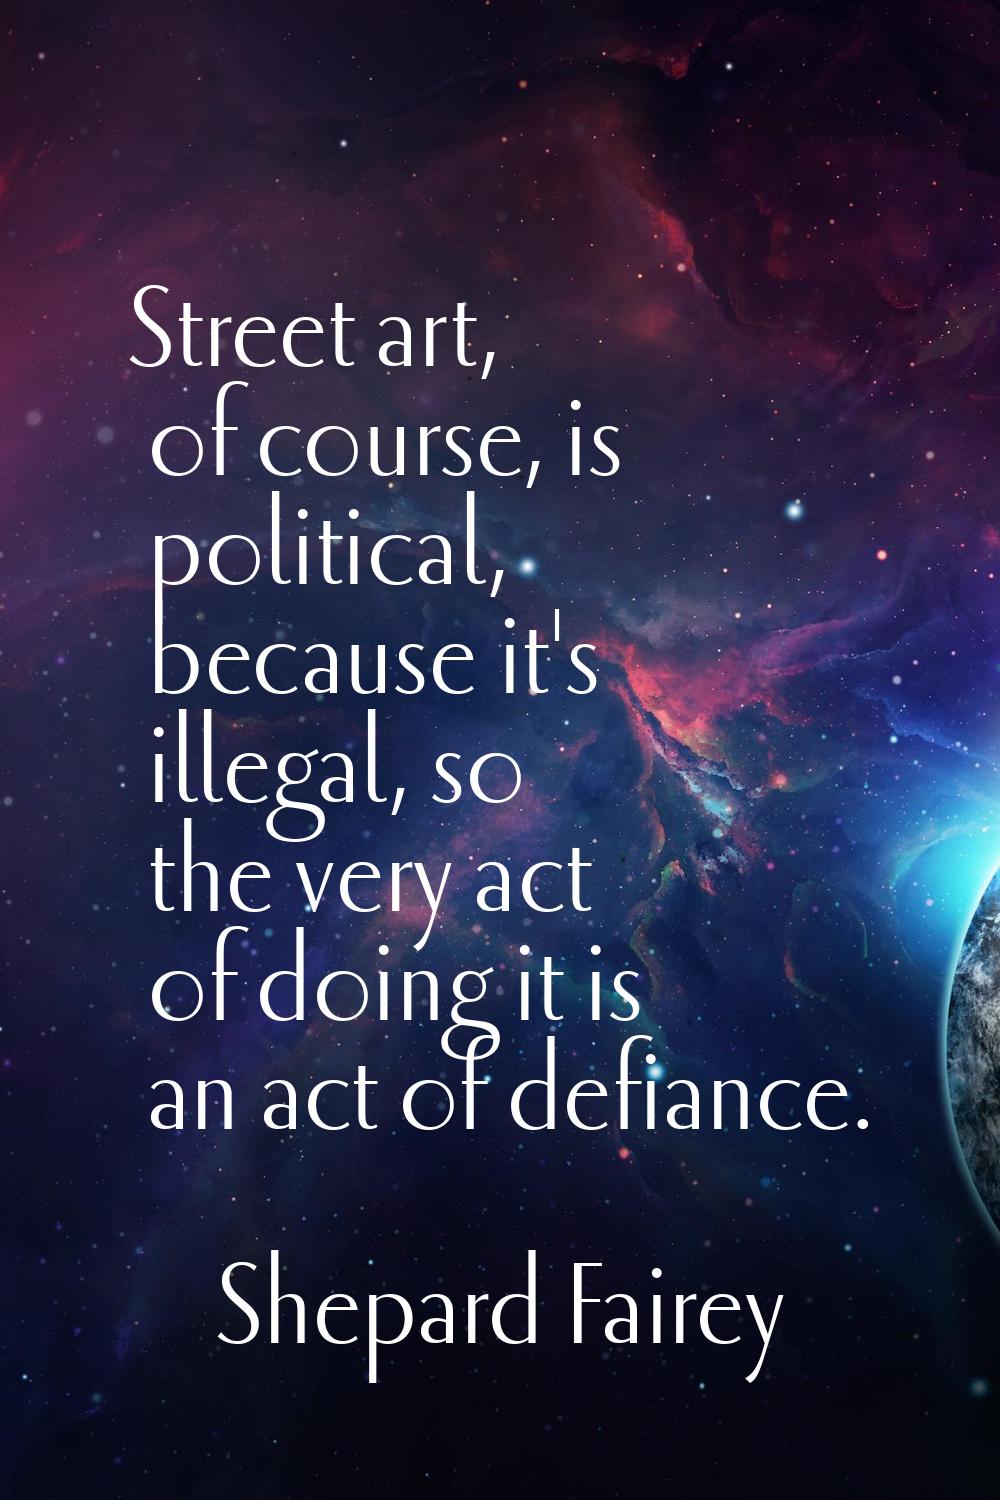 Street art, of course, is political, because it's illegal, so the very act of doing it is an act of